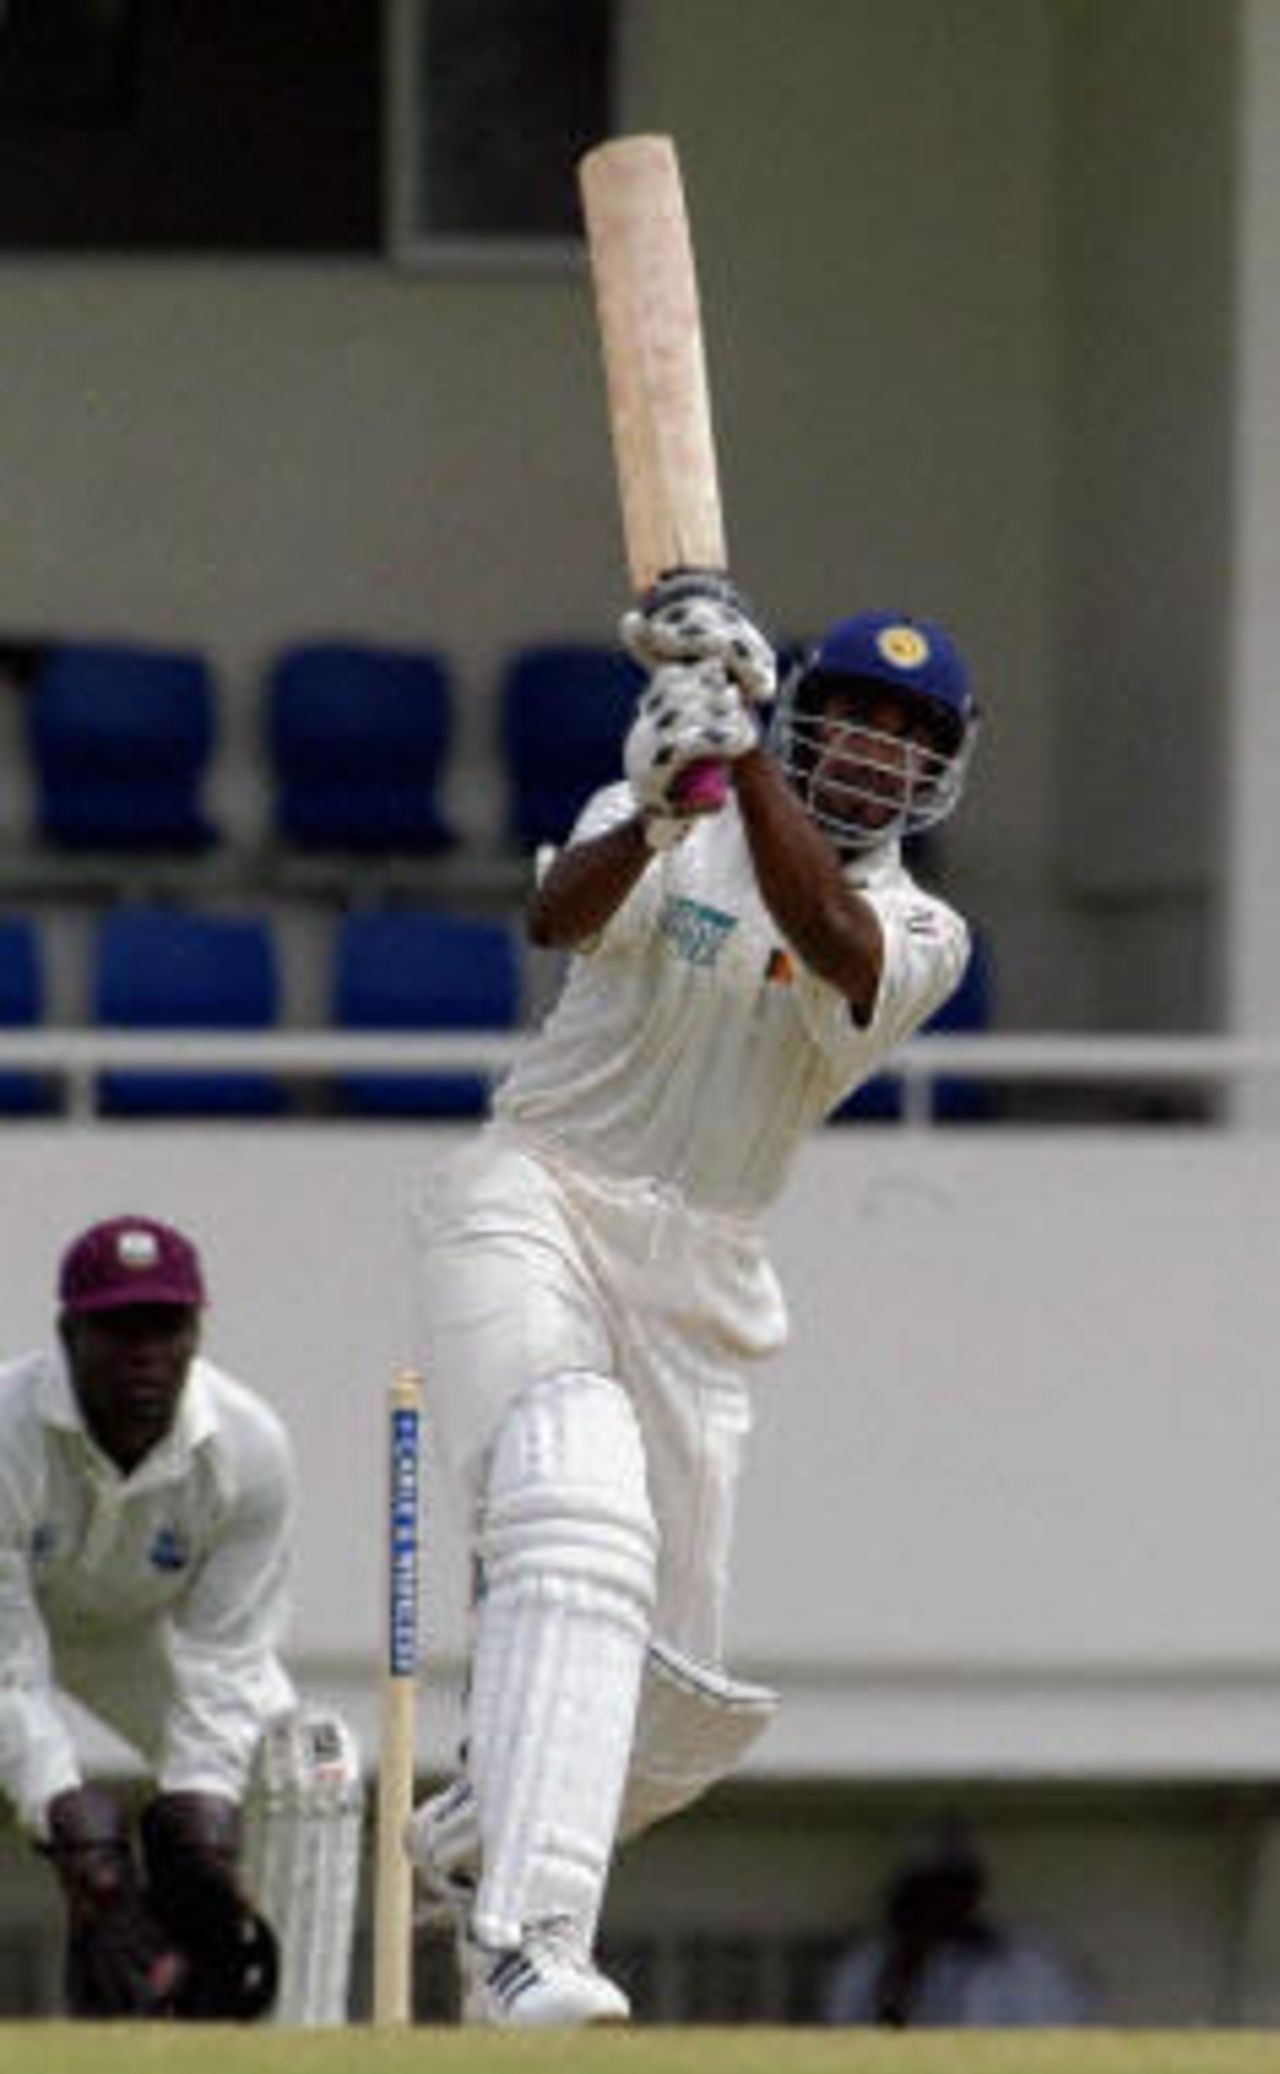 Chaminda Vaas lifts West Indies bowler Wavell Hinds for 4 during his innings of 38 on the second day of their first test match at St Lucia.